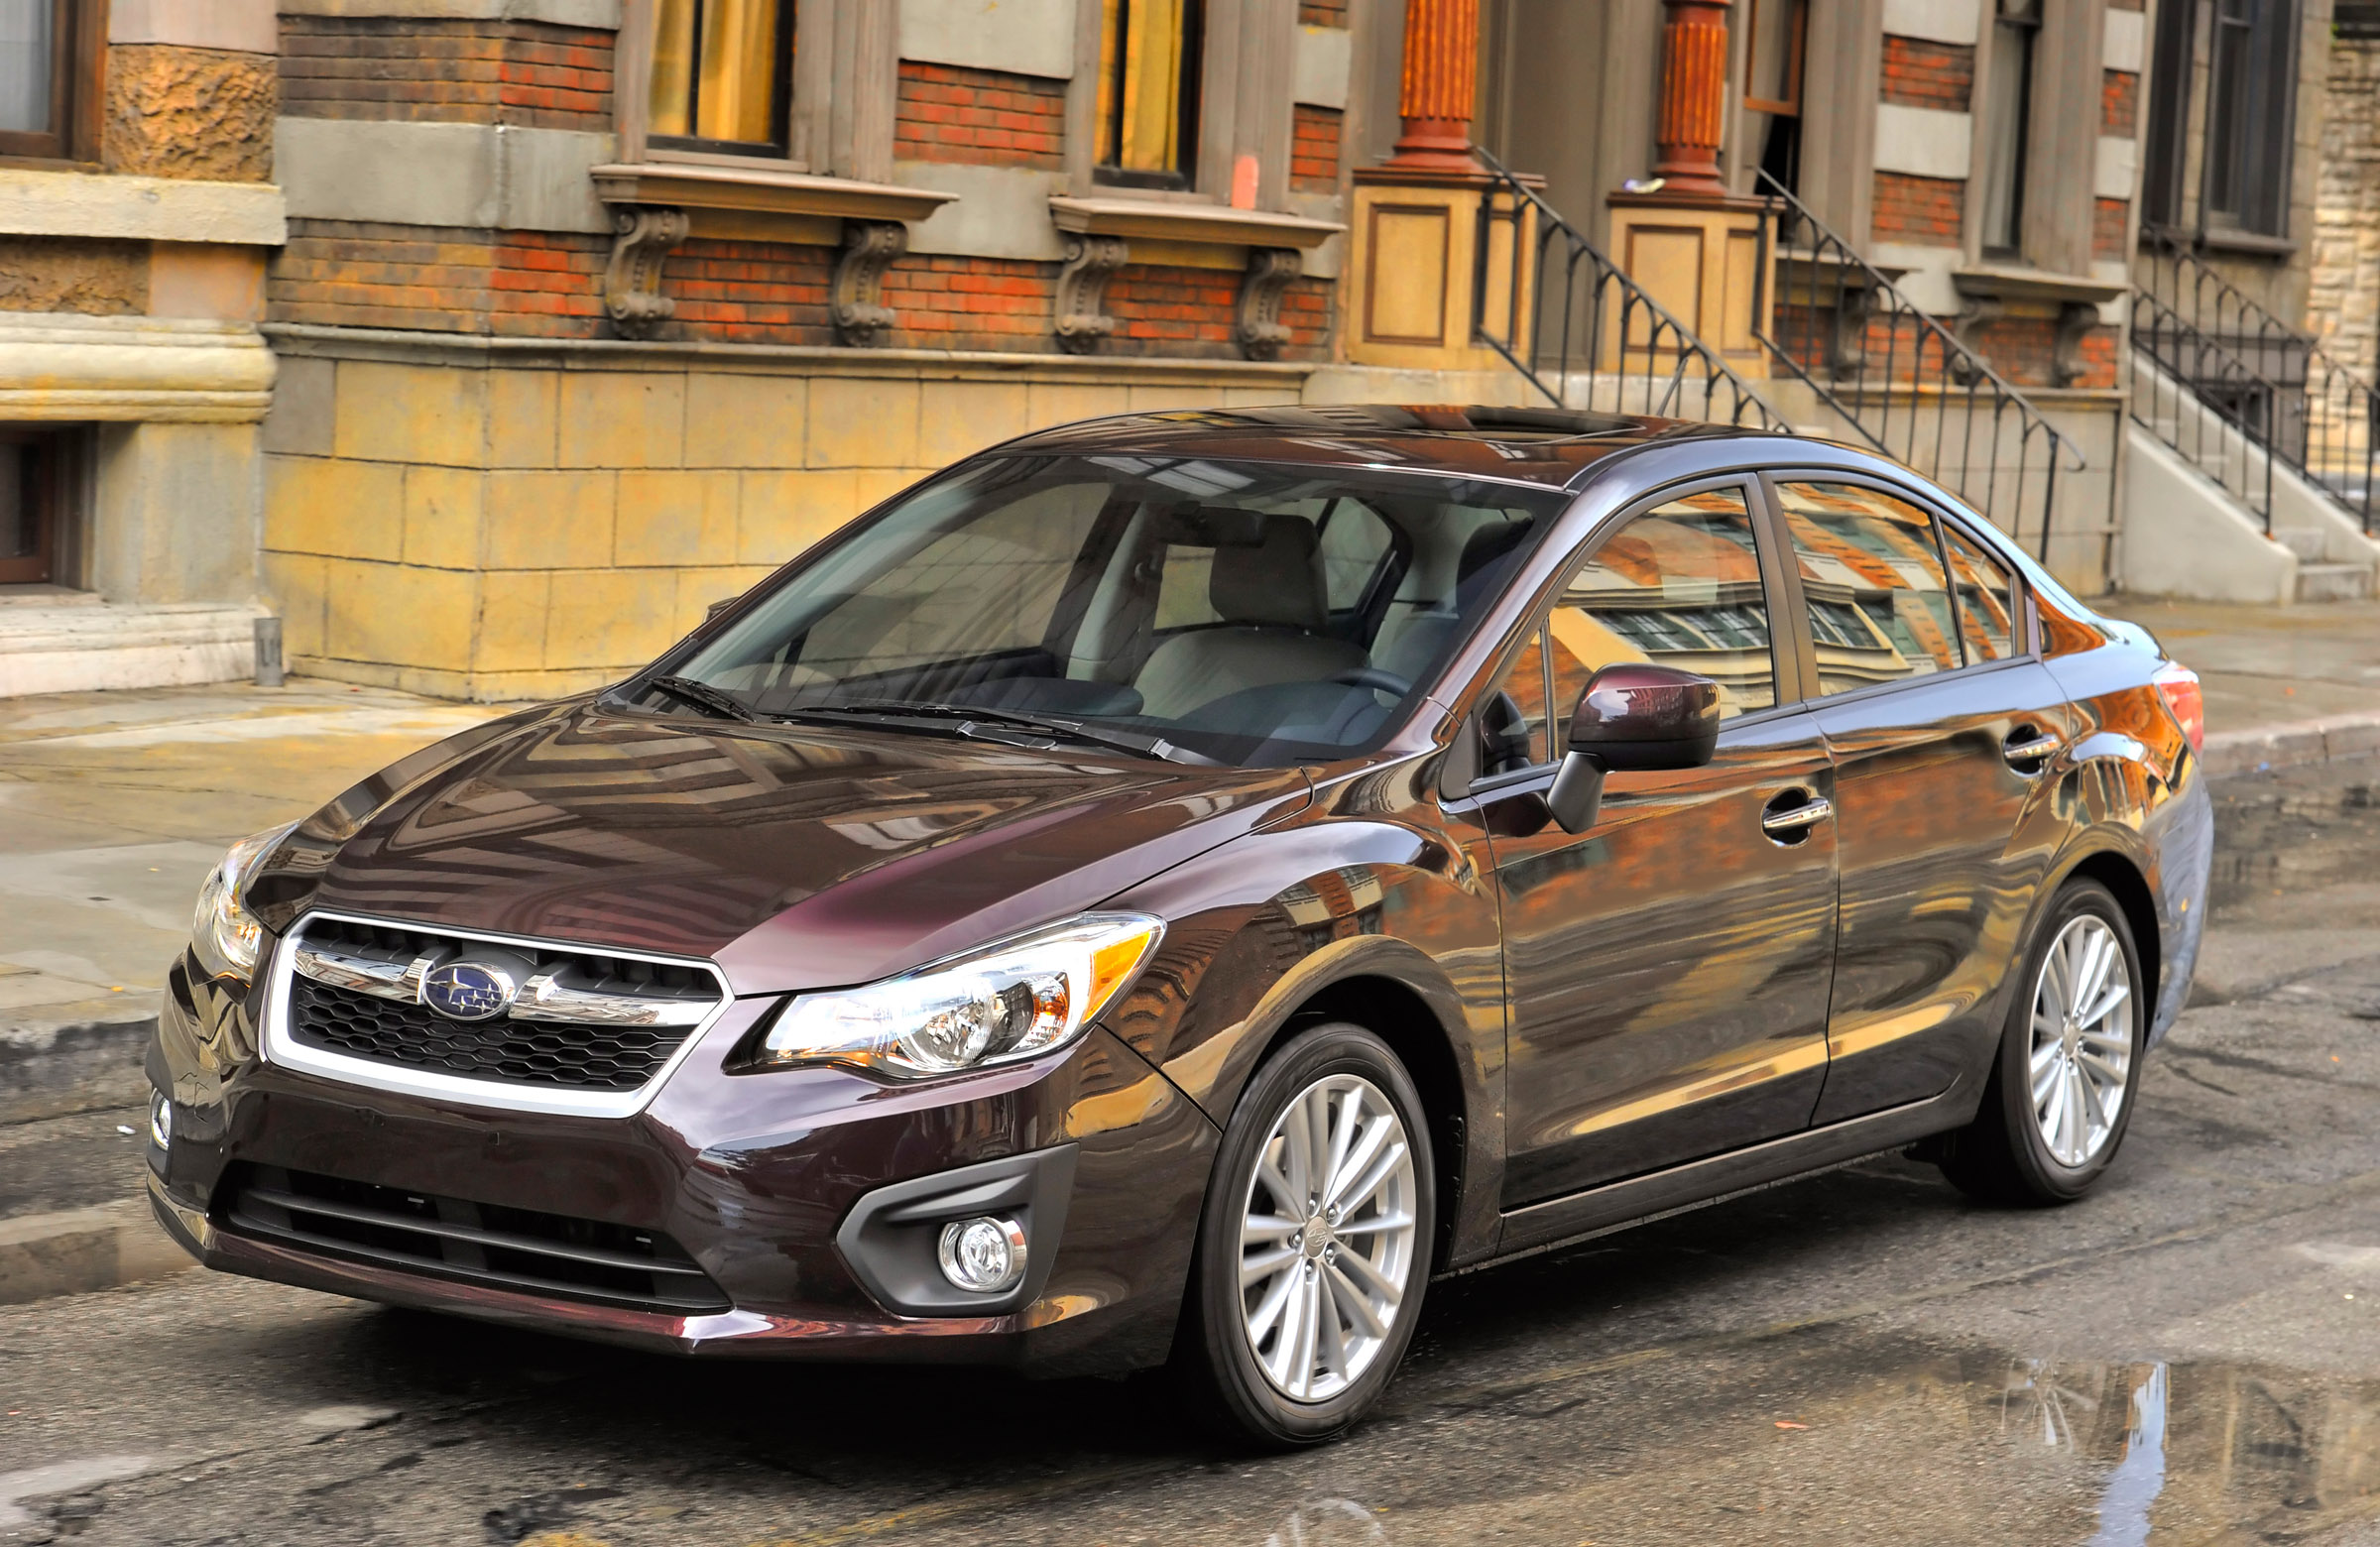 Research 2012
                  SUBARU Impreza pictures, prices and reviews